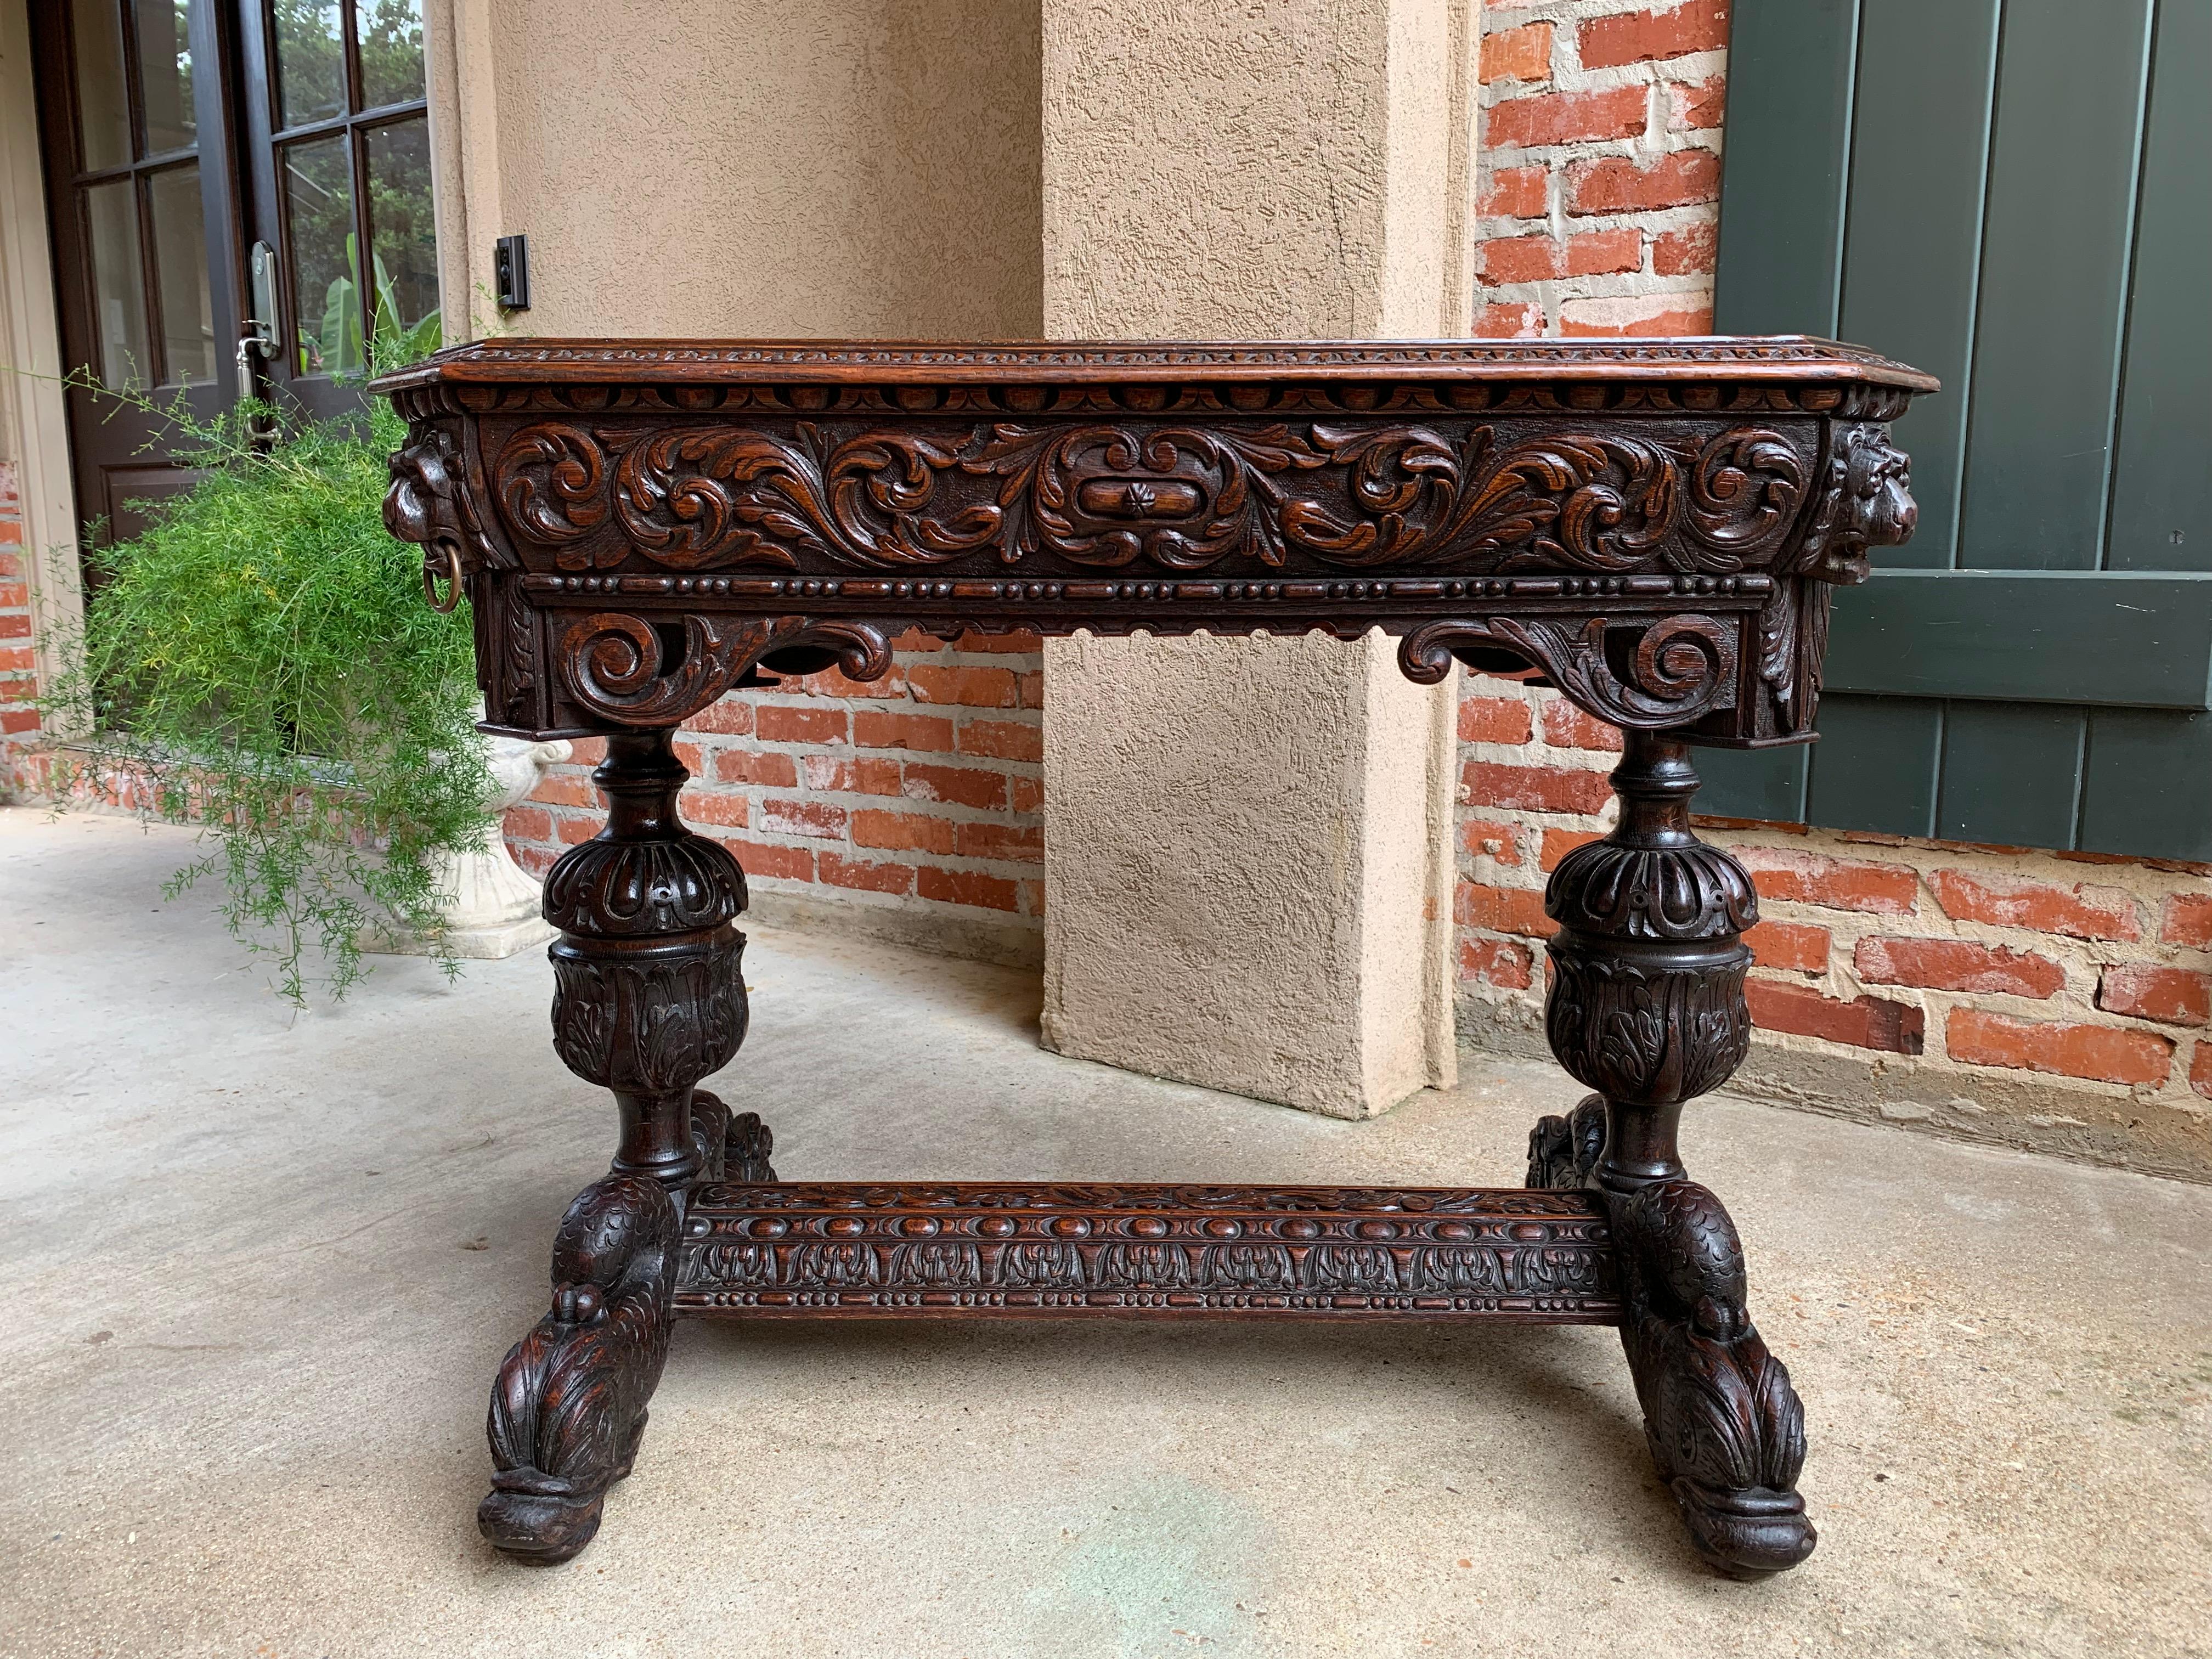 Direct from England, a wonderful antique English carved oak table or “bureau plat” desk, commonly called a “dolphin table” for the ornate serpent or ‘dolphin’ feet~
~SMALLER SIZE, in addition to using as a sofa table or desk, imagine this as a